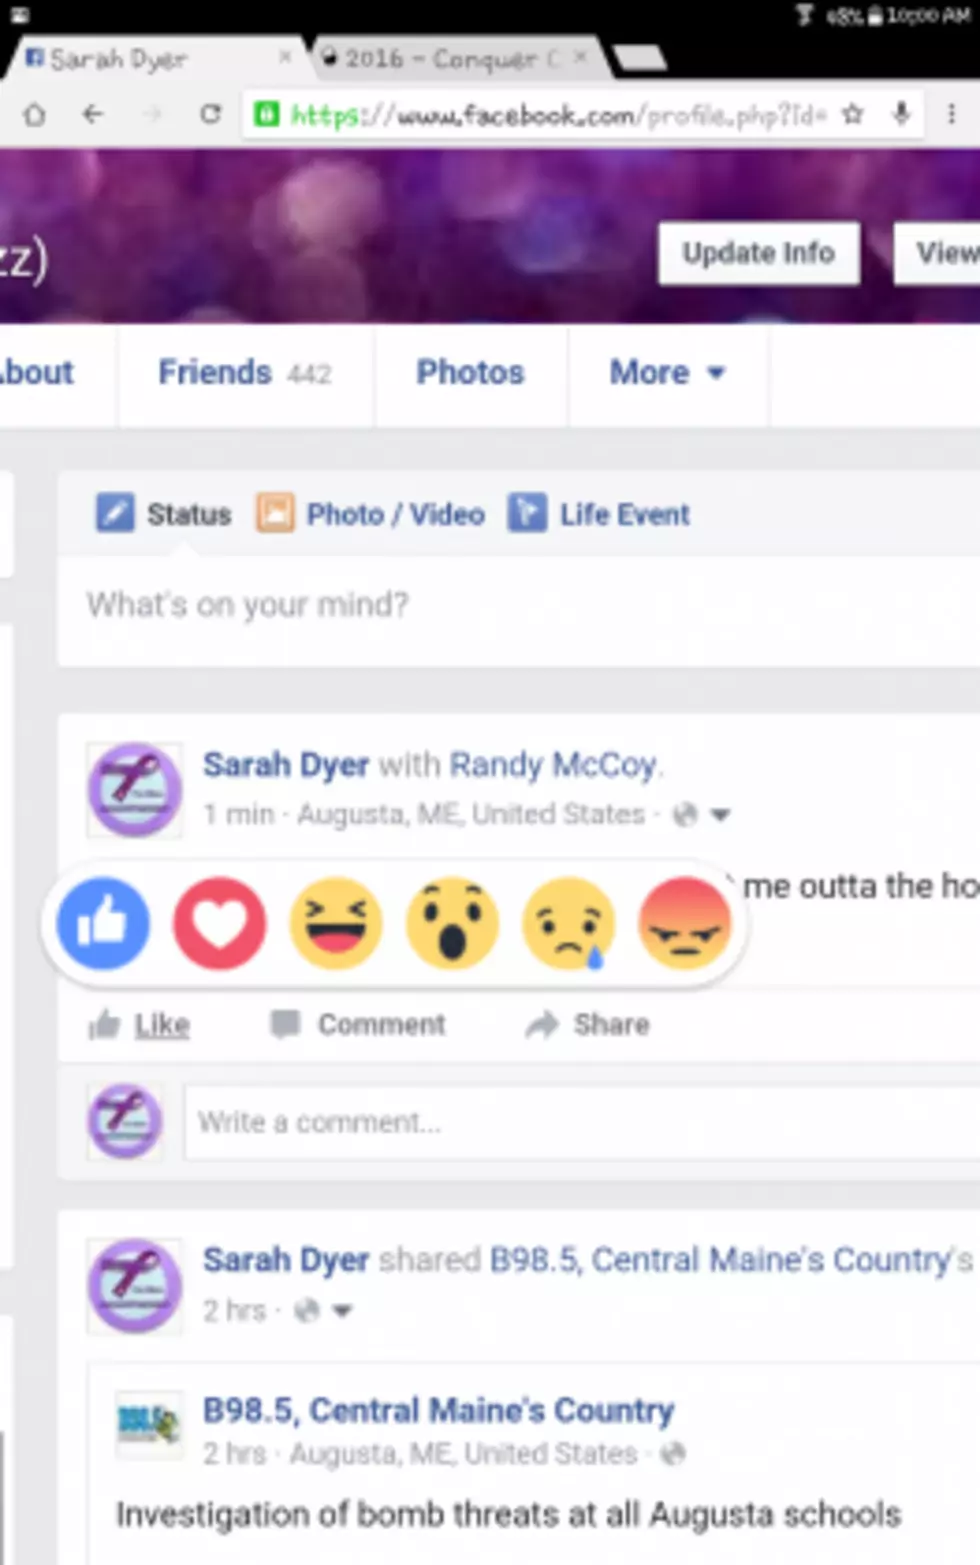 Do You Like The New Facebook React Option? [POLL]